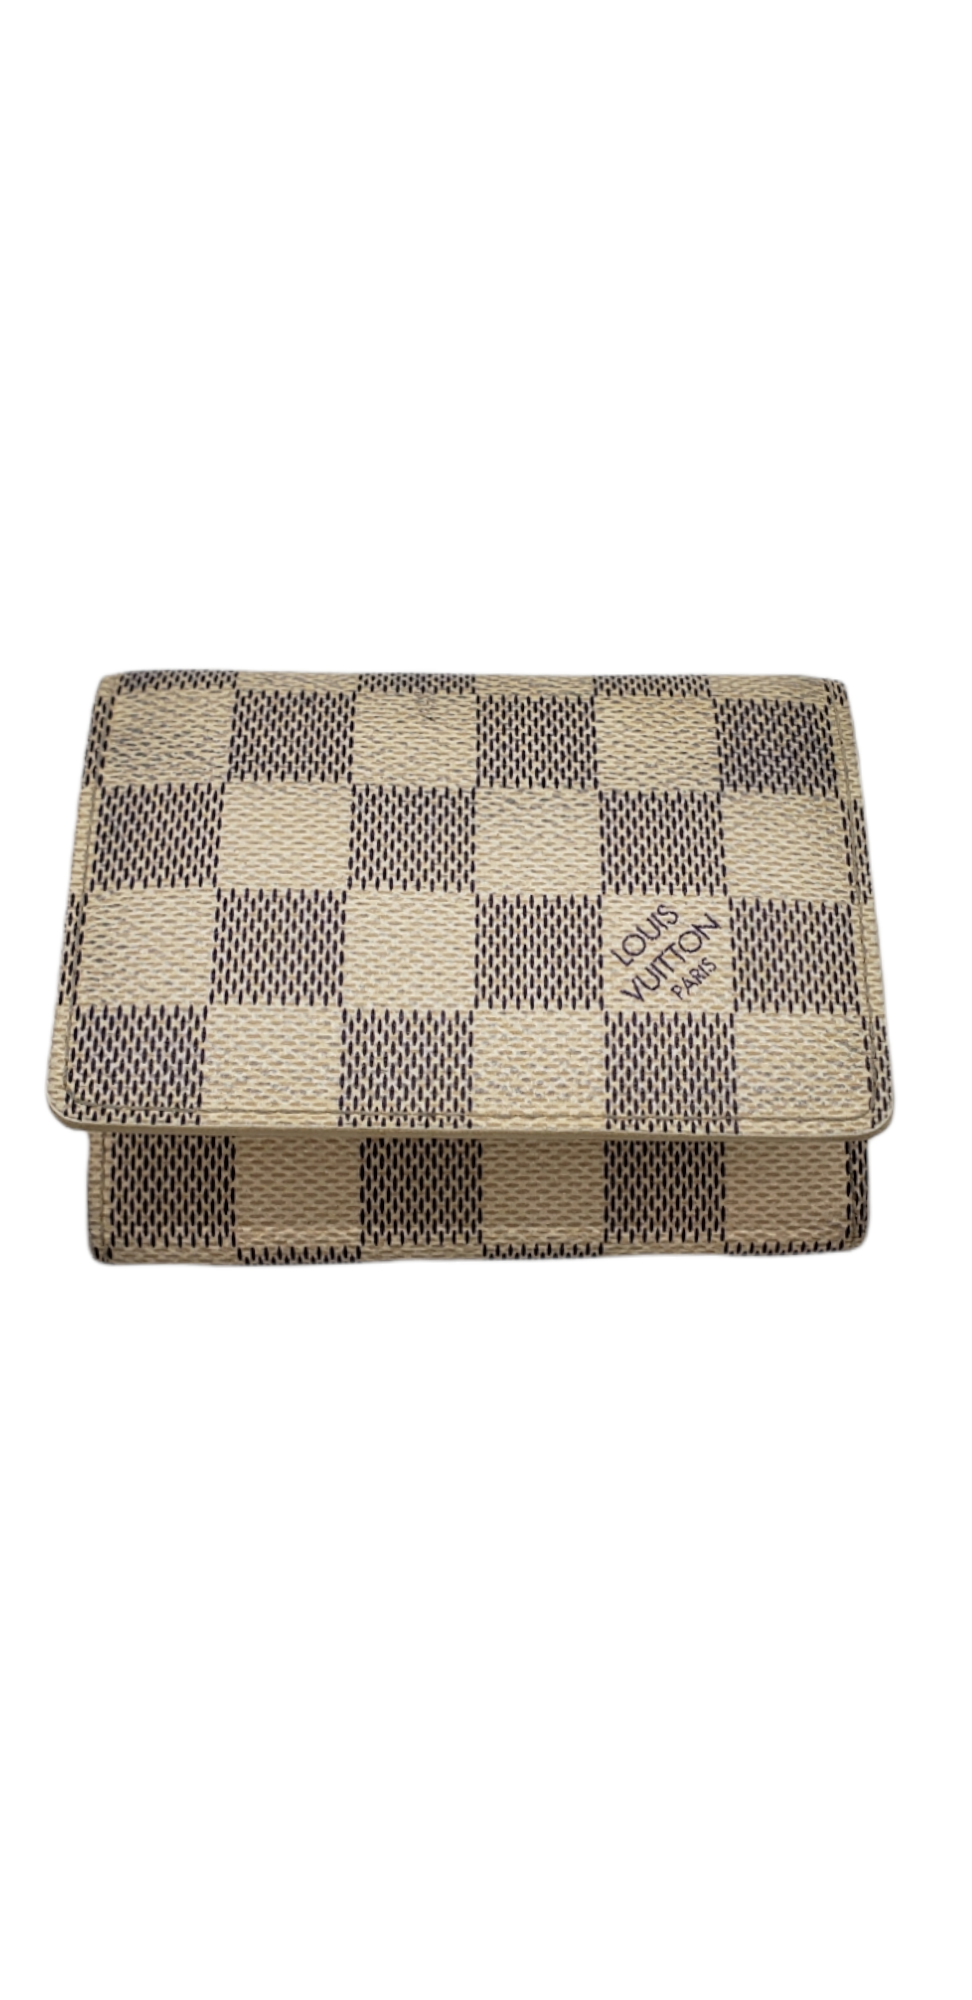 Louis Vuitton

Card Holder

Damier Azure

 MM Initials on tope inside flap

Condition: Grerat. Inside no spots just initials. Outside: Wear from Jeans: Ink Transfer: Has not been cleaned